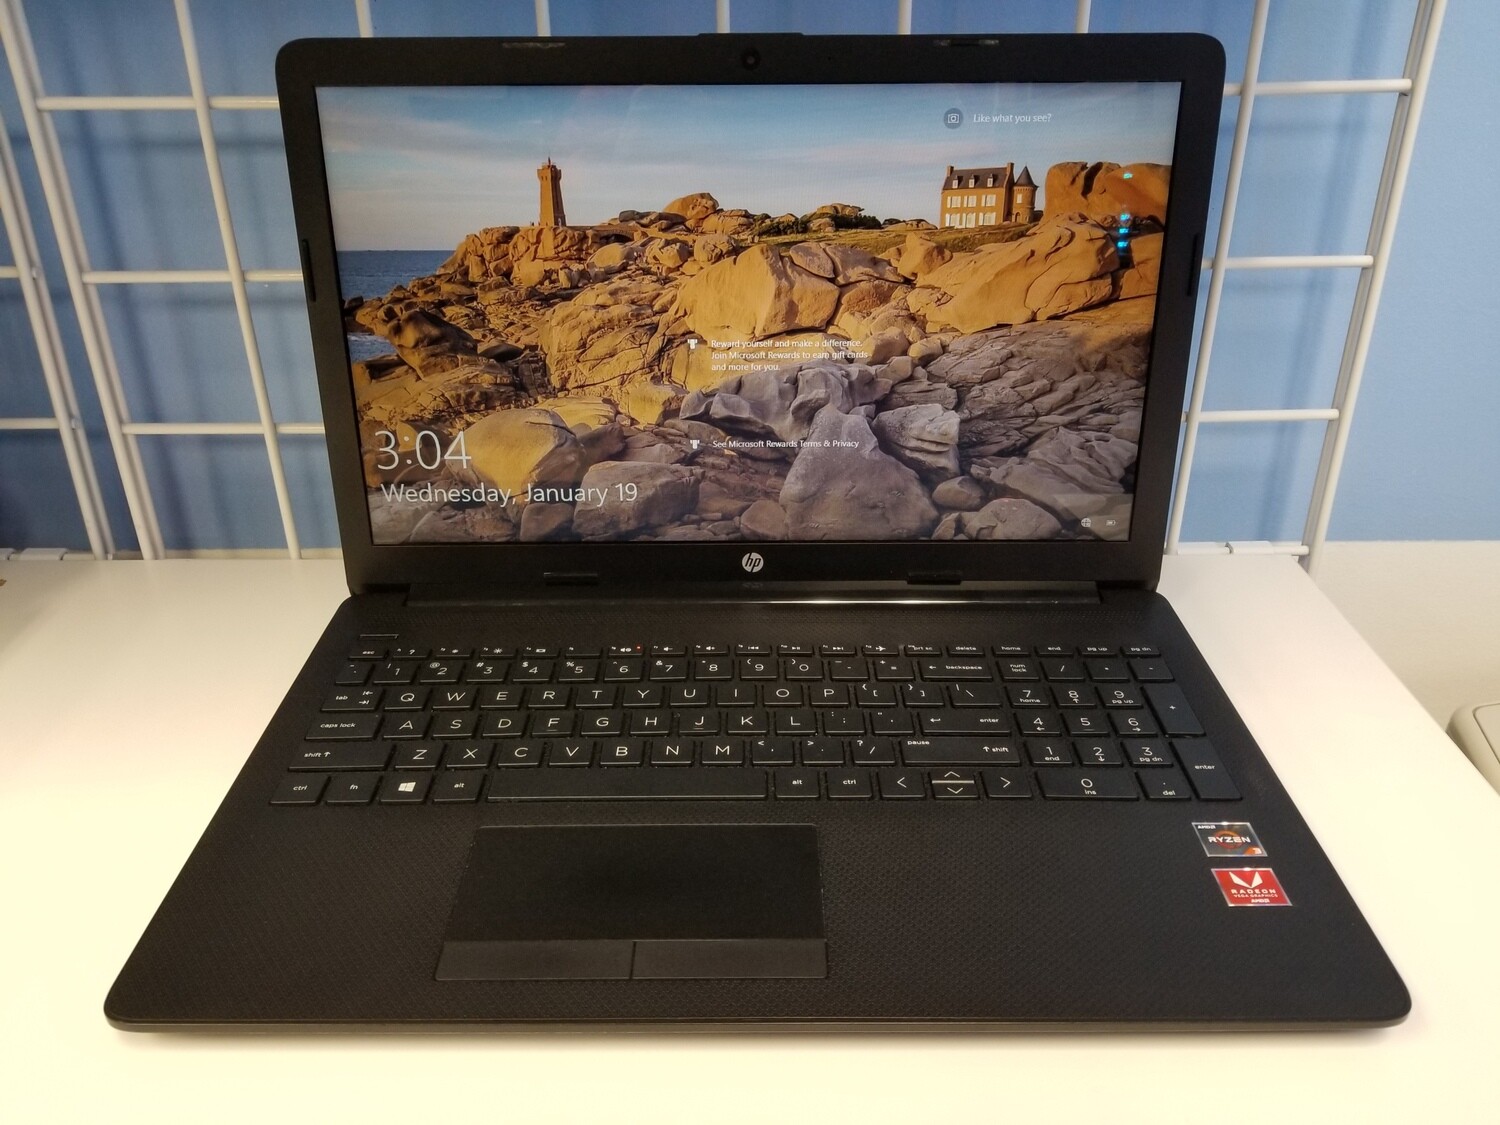 HP Laptop 15-db1032nr 15.6" AMD Ryzen 3 3200U@2.60 GHz 8GB RAM 256GB SSD  Windows 10 Home, AMD Radeon Vega 3 Graphics - Store - Sell Your Macbook  Pro, Sell Your Cell Phone, Sell Your Computer